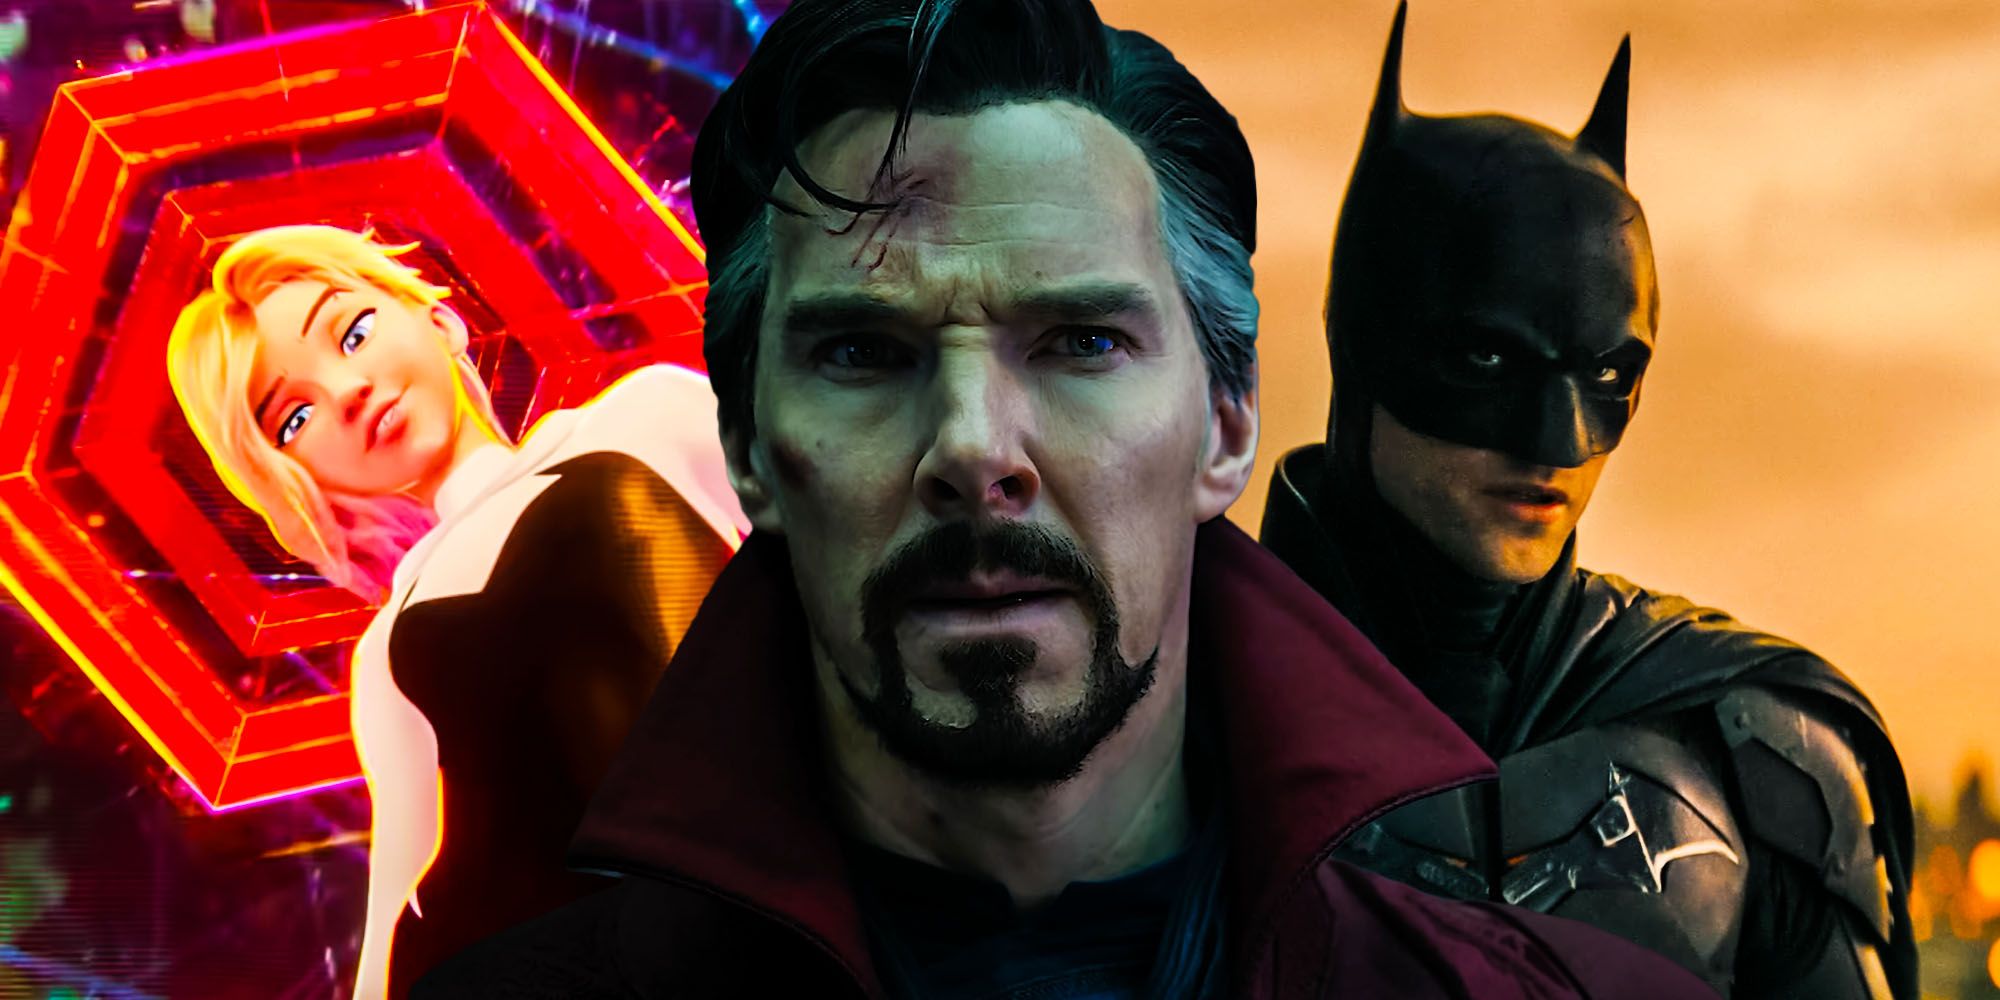 Doctor strange in the multiverse of madness the batman across the spiderverse will be the Biggest movie of 2022